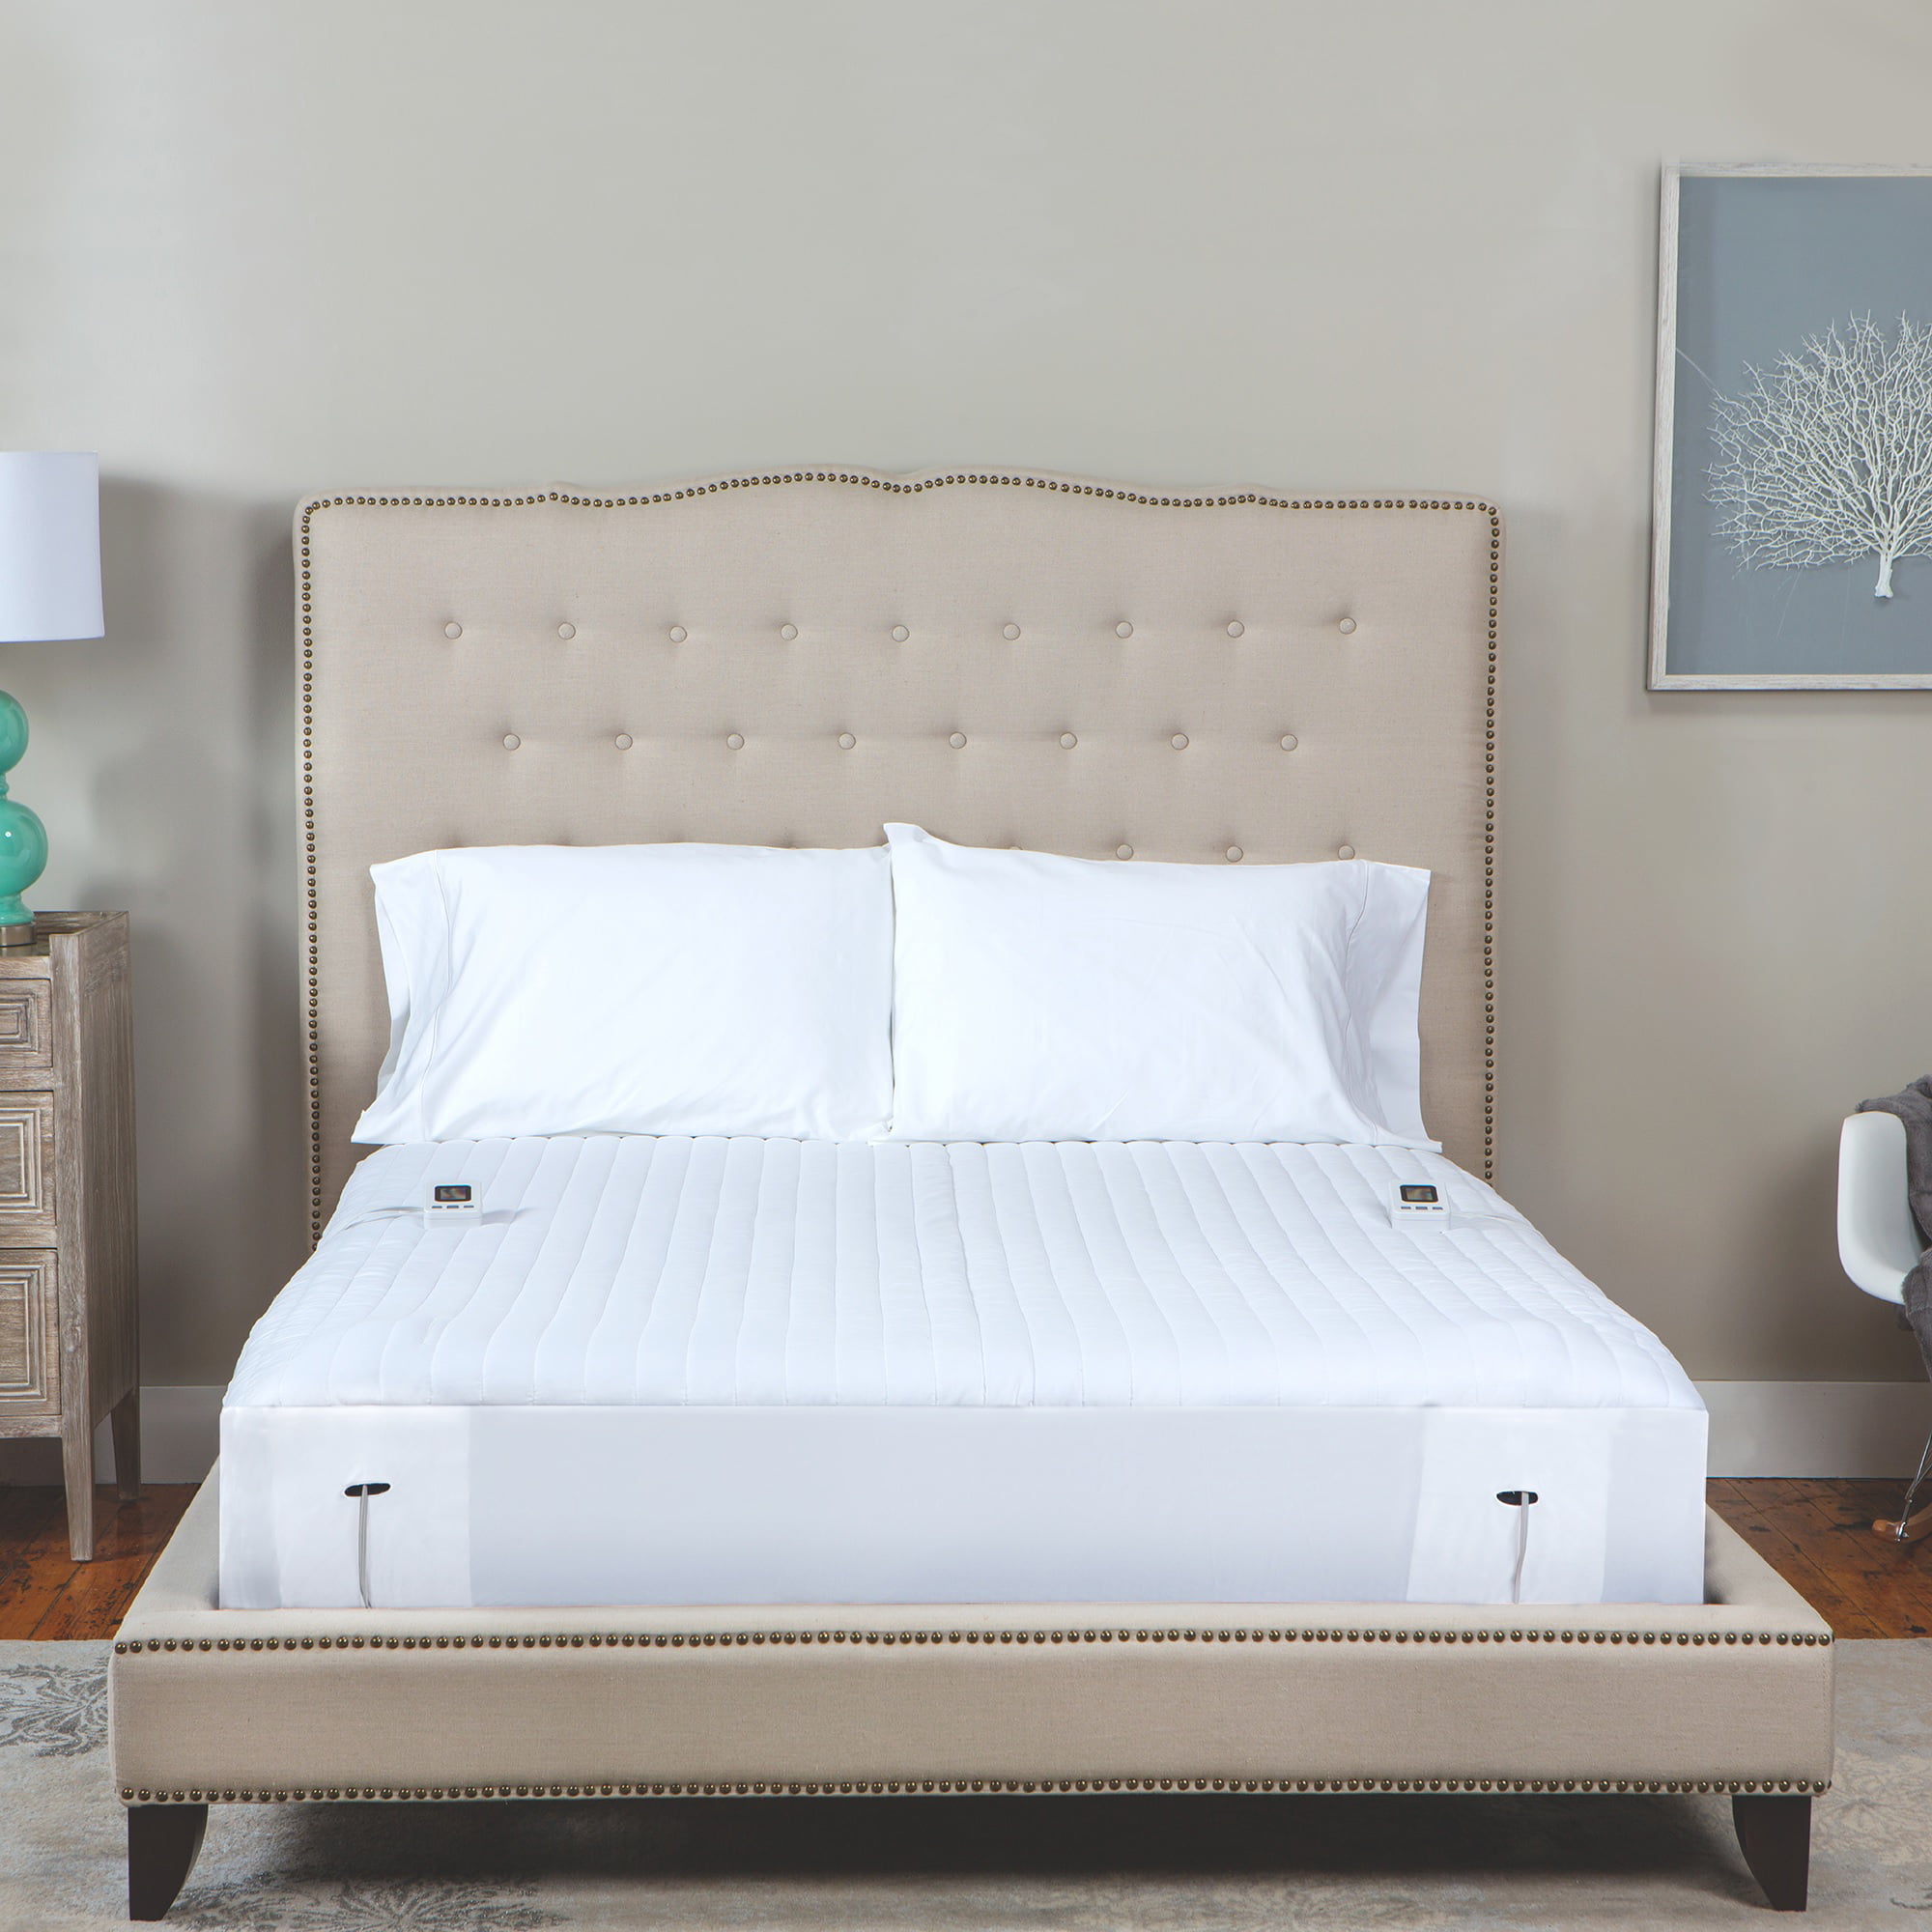 80" Queen Size Warming Mattress Pad with 2 Digital ...